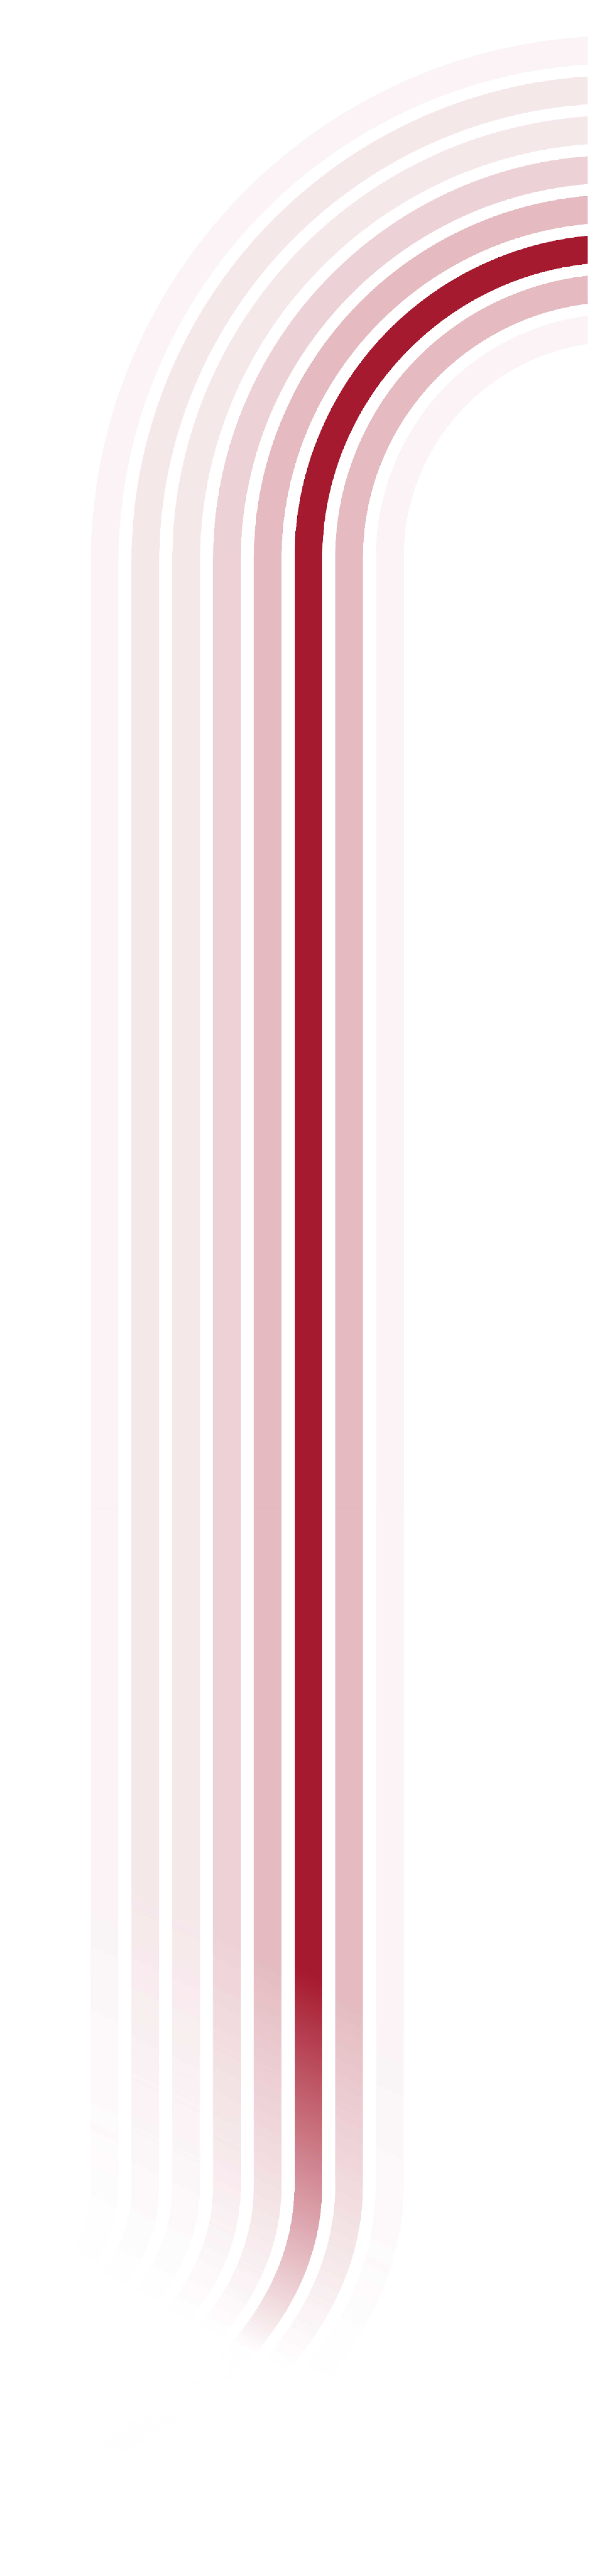 8 Striped Background Lines